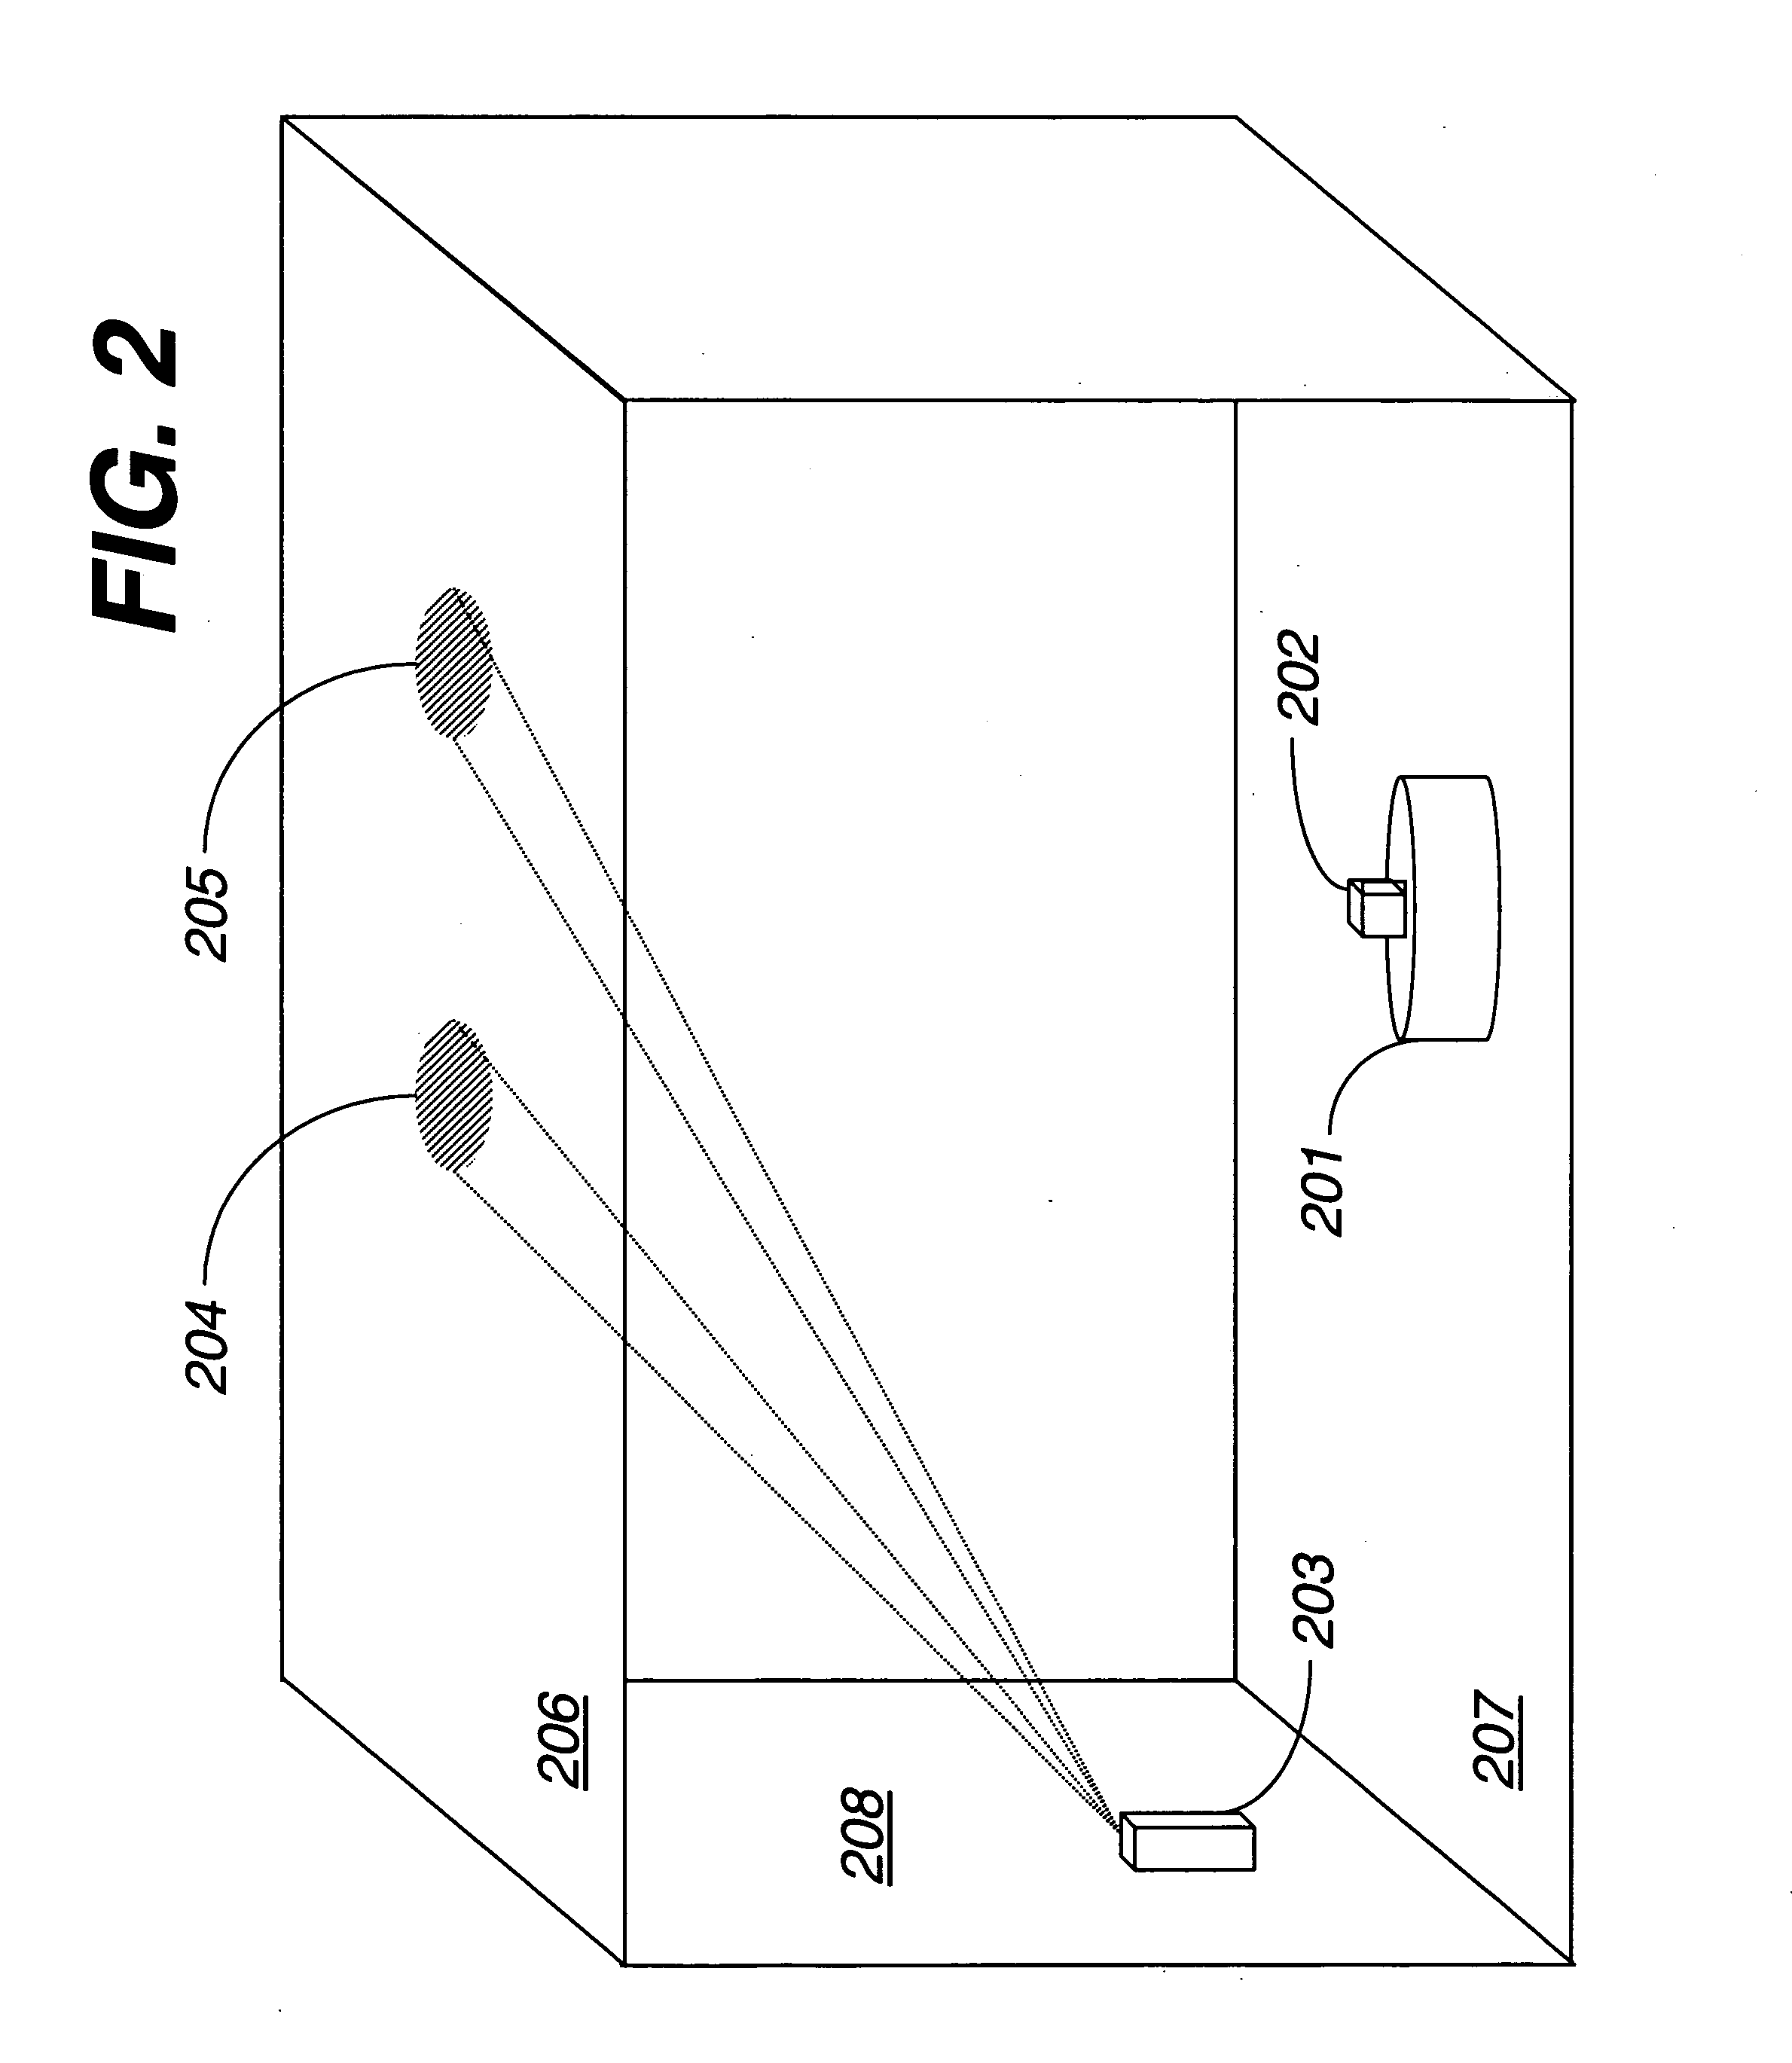 Sensing device and method for measuring position and orientation relative to multiple light sources